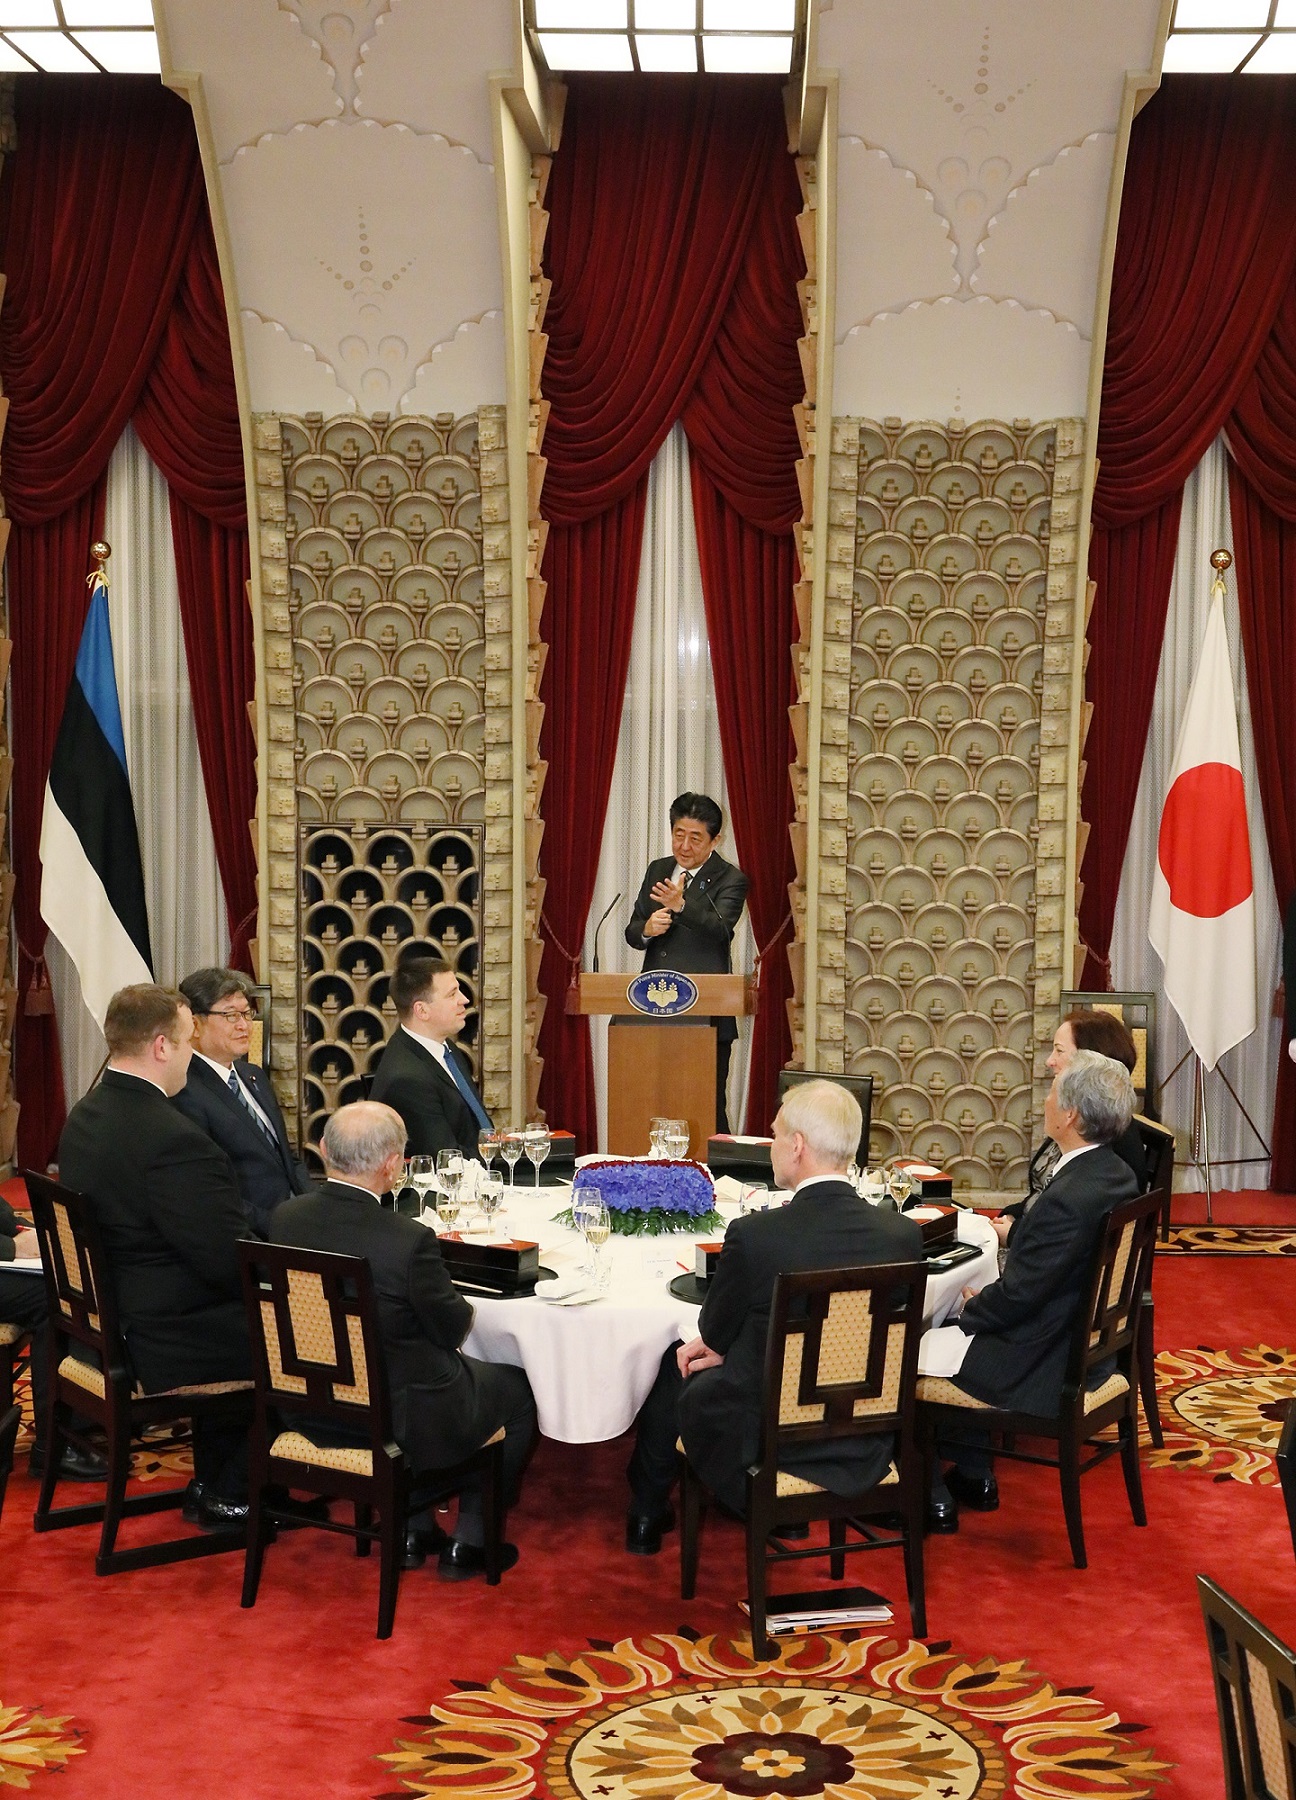 Photograph of the Prime Minister delivering an address at the banquet (5)